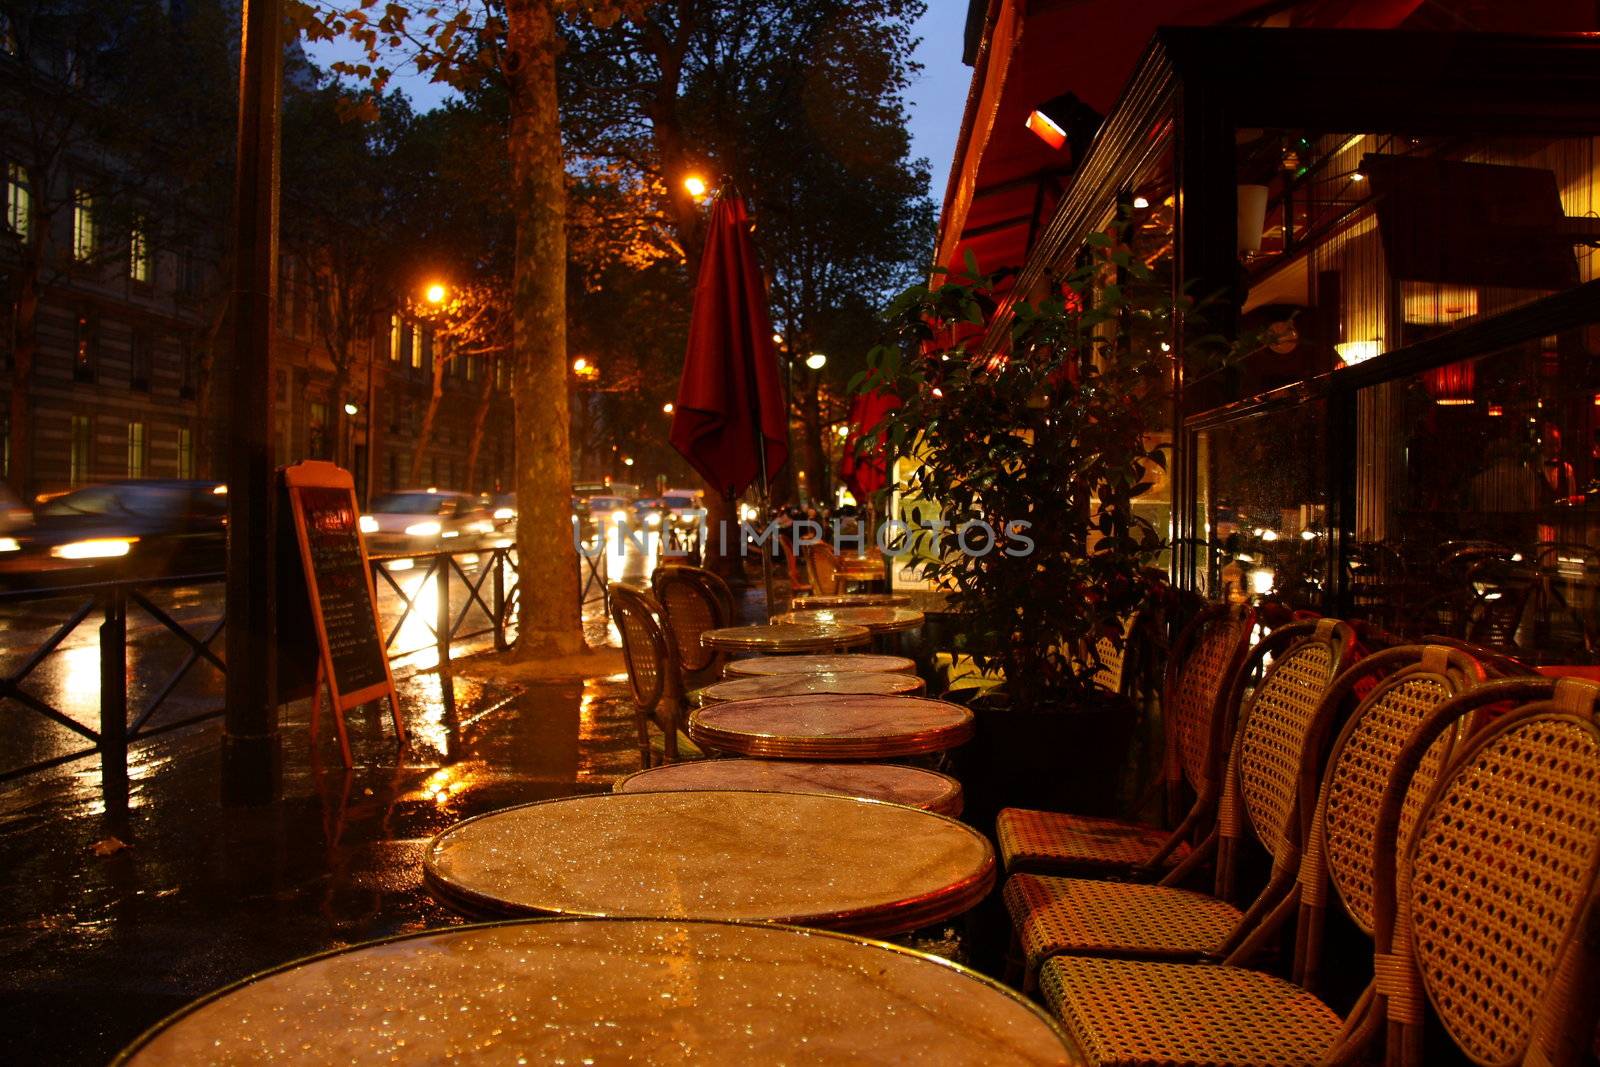 cafe in paris at evening, tables are wet after rain